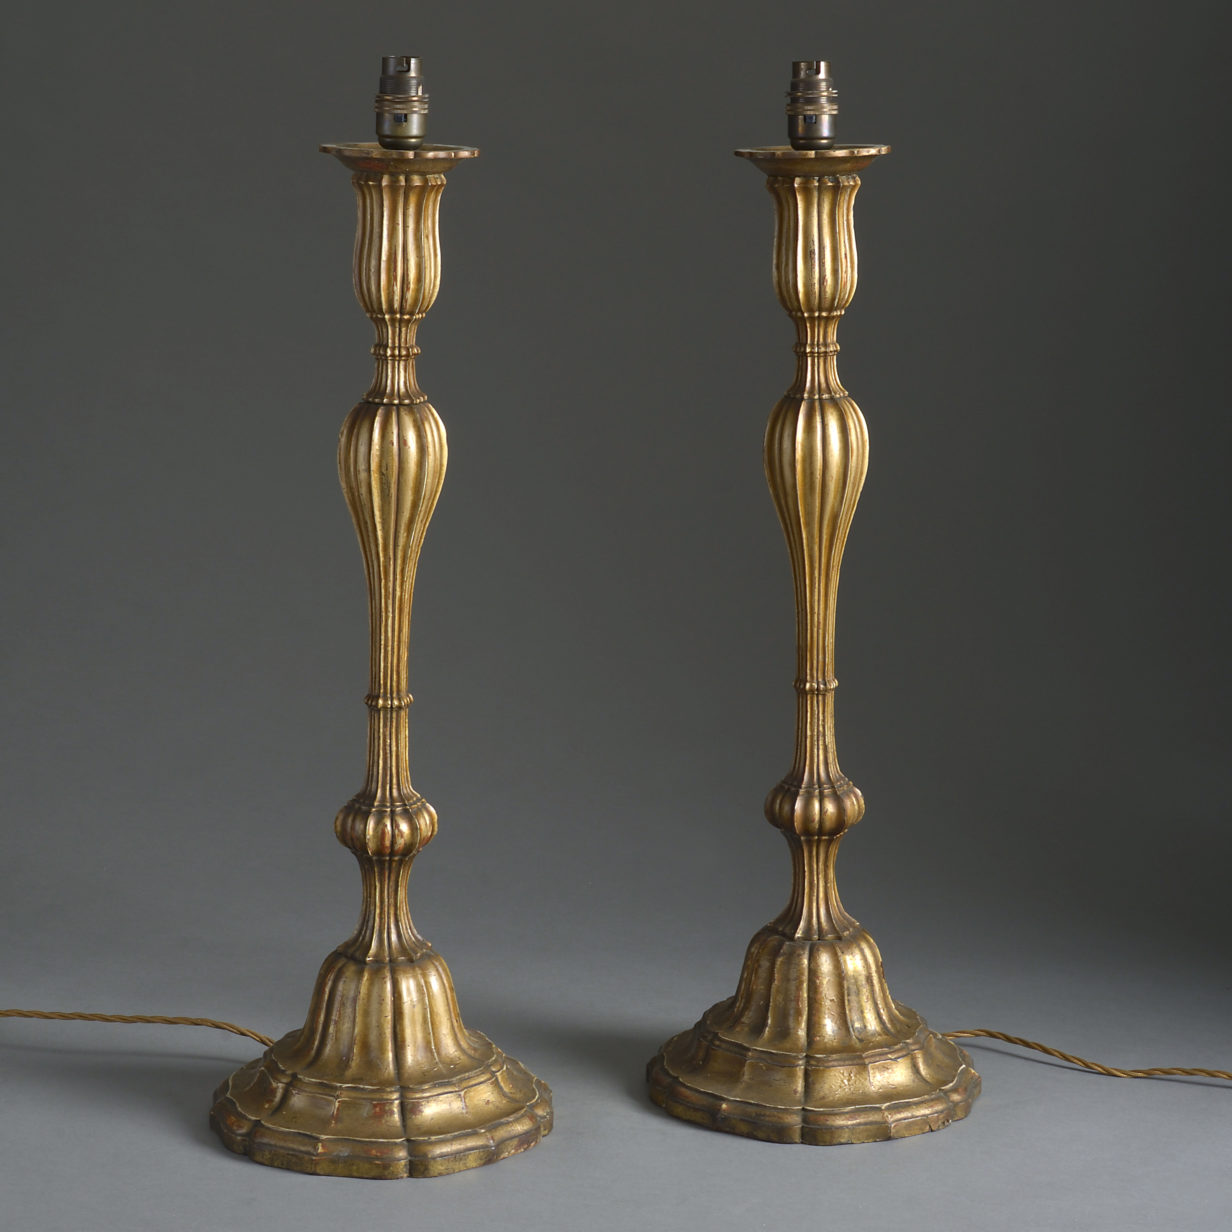 Early 20th century carved giltwood table lamp